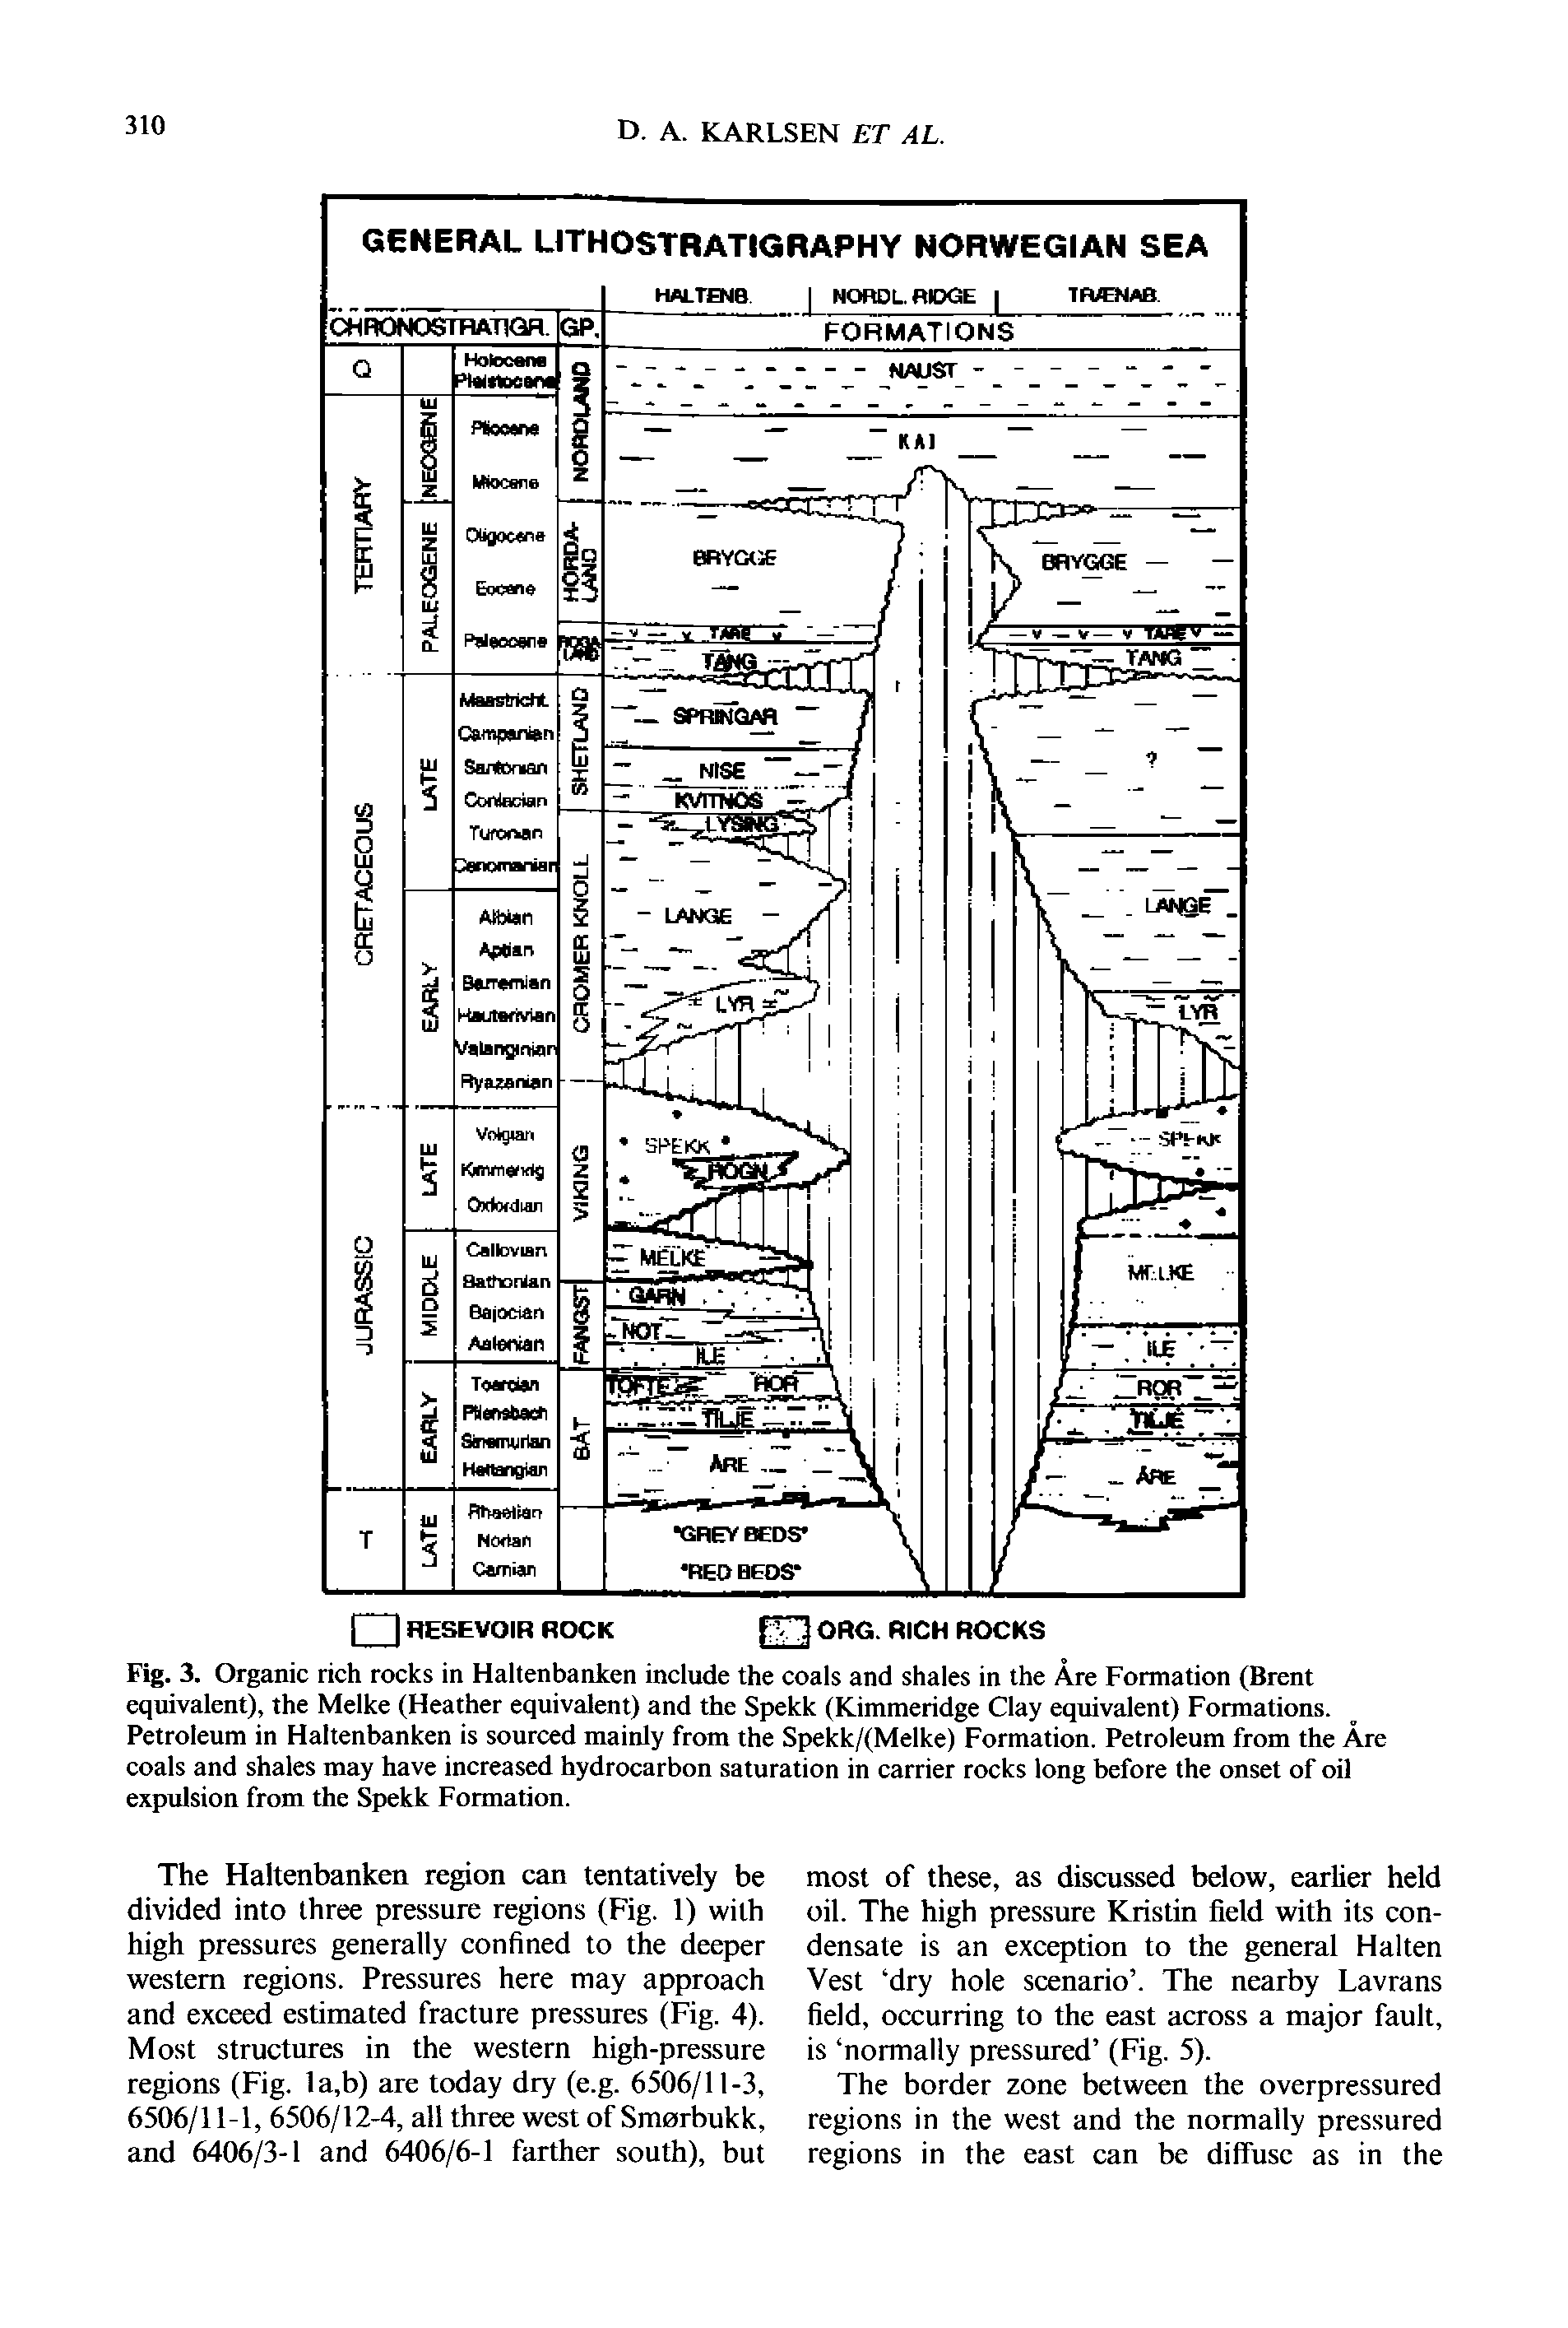 Fig. 3. Organic rich rocks in Haltenbanken include the coals and shales in the Are Formation (Brent equivalent), the Melke (Heather equivalent) and the Spekk (Kimmeridge Clay equivalent) Formations. Petroleum in Haltenbanken is sourced mainly from the Spekk/(Melke) Formation. Petroleum from the Are coals and shales may have increased hydrocarbon saturation in carrier rocks long before the onset of oil expulsion from the Spekk Formation.